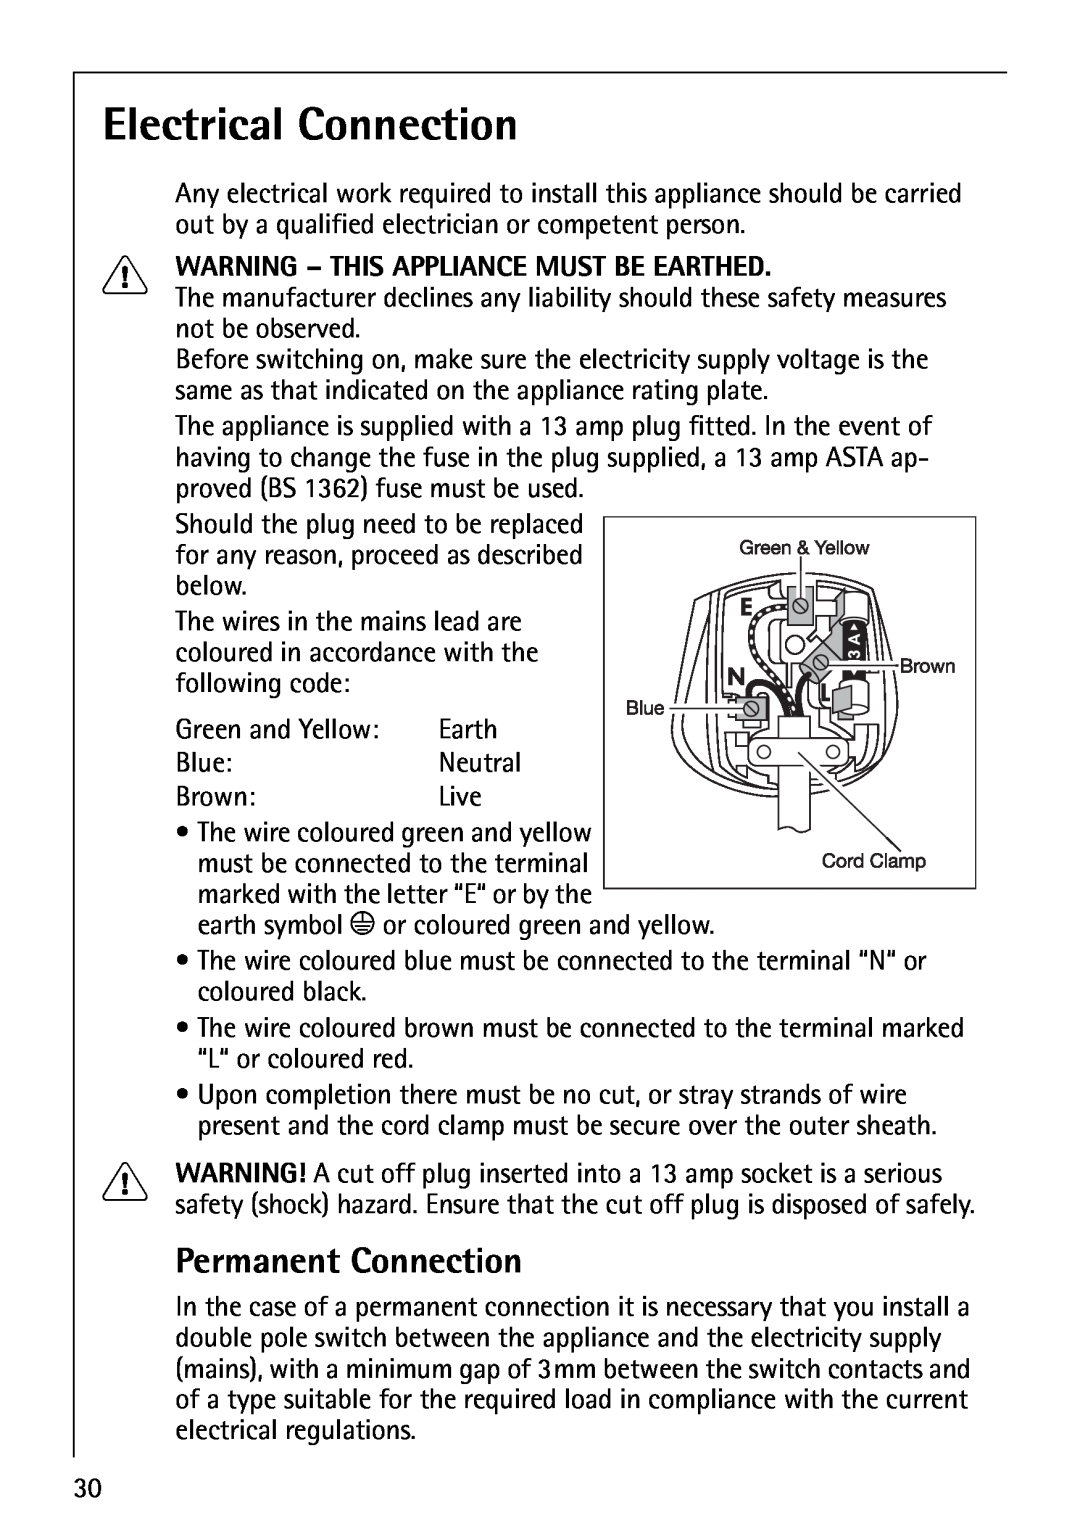 Electrolux LAVAMAT 74700 manual Electrical Connection, Permanent Connection, Warning - This Appliance Must Be Earthed 